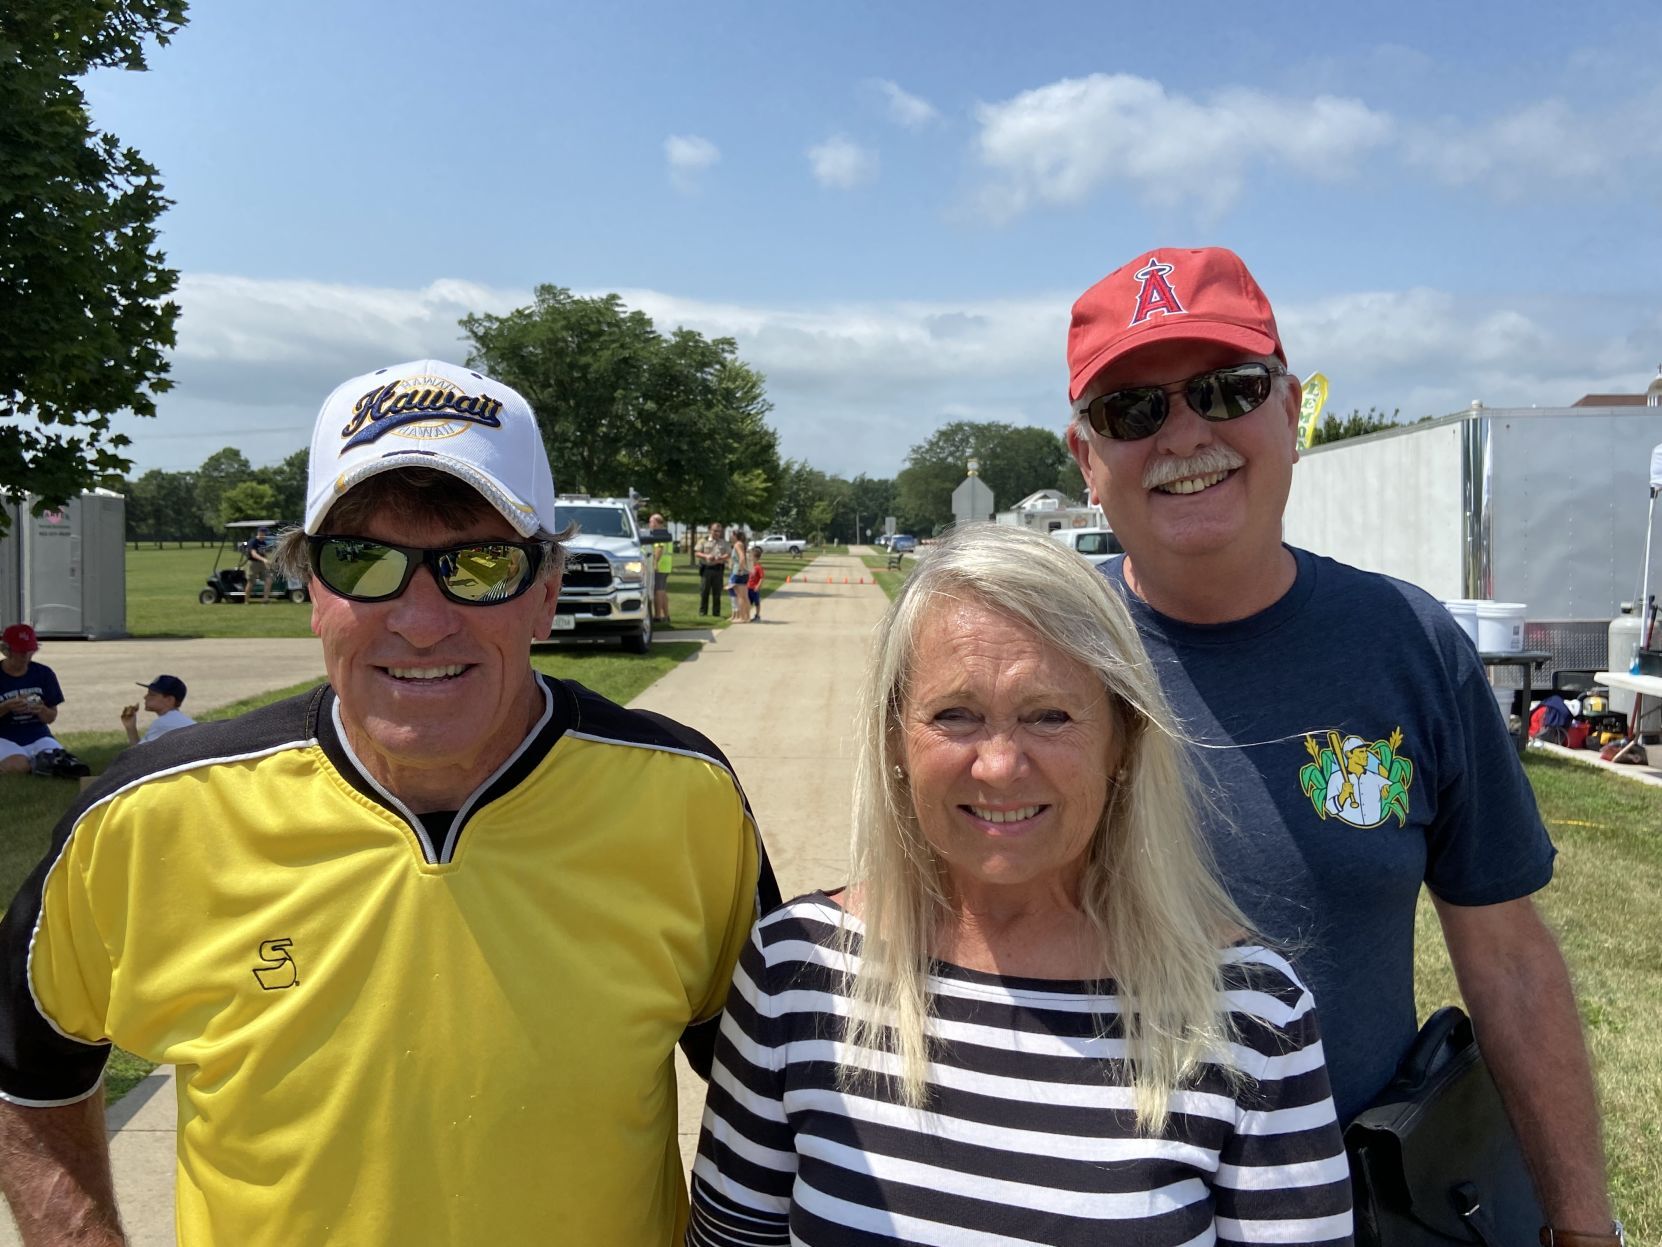 Mike Staudt and Cindy Staudt, both of Waterloo, Iowa, and Dave Lee (right), of Mission Viejo, Calif., attend Beyond the Game festivities on Wednesday in Dyersville, Iowa. 